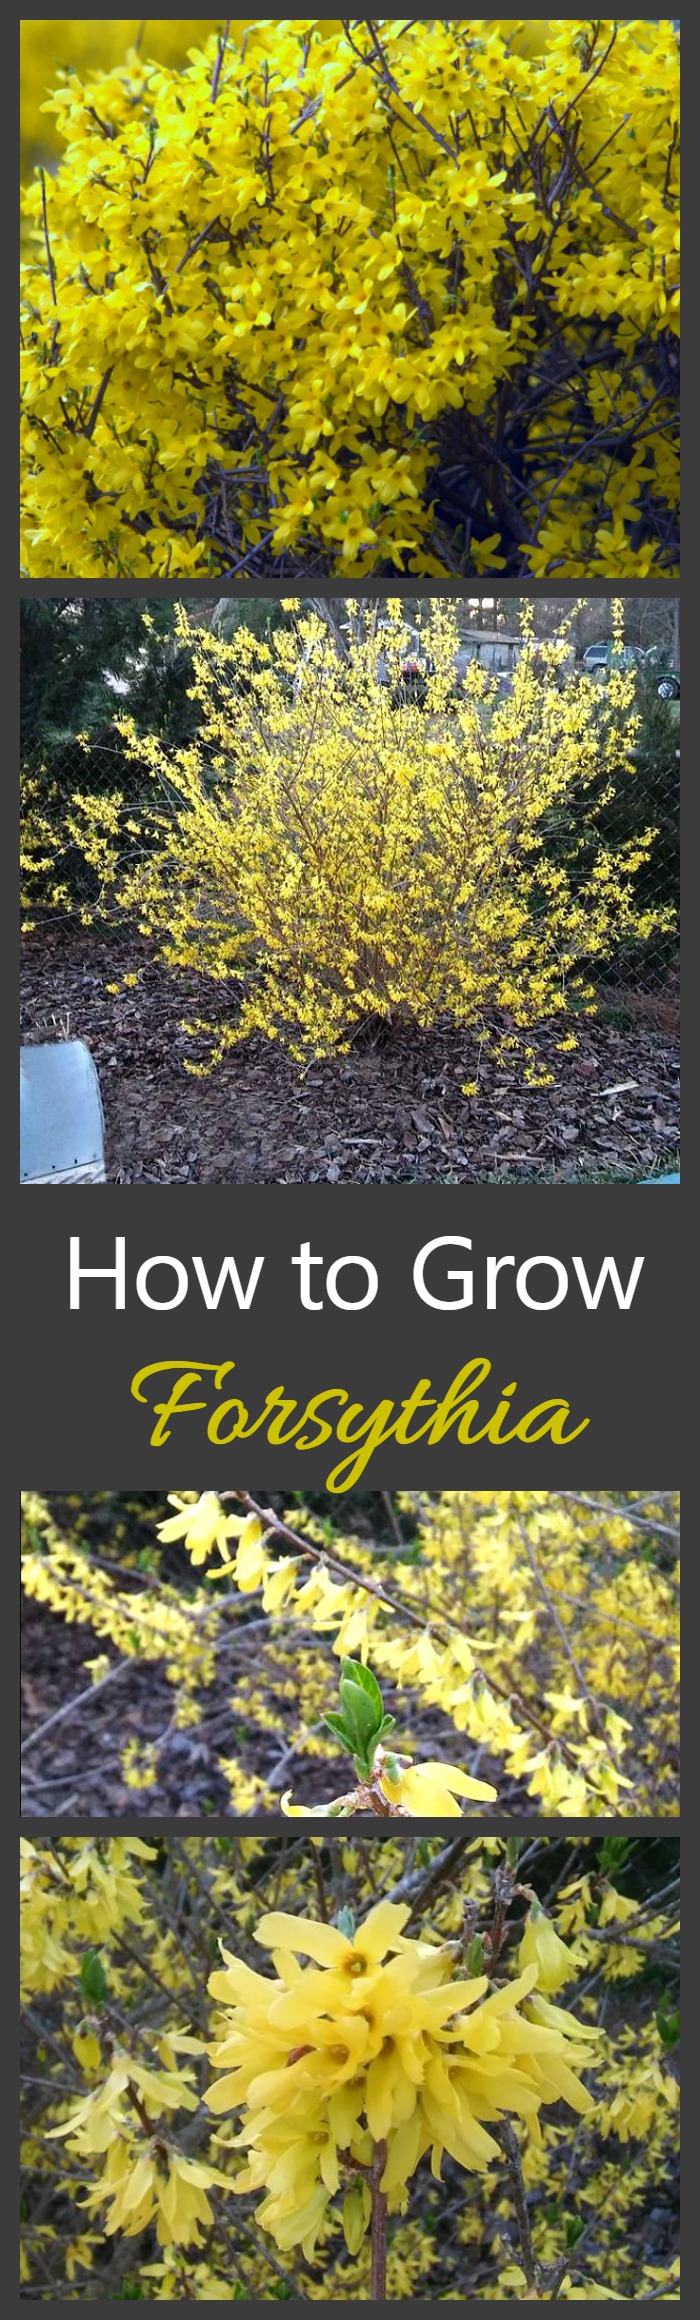 Growing Forsythia bushes is one of the best ways to get a really early show of flowers in your yard in spring.